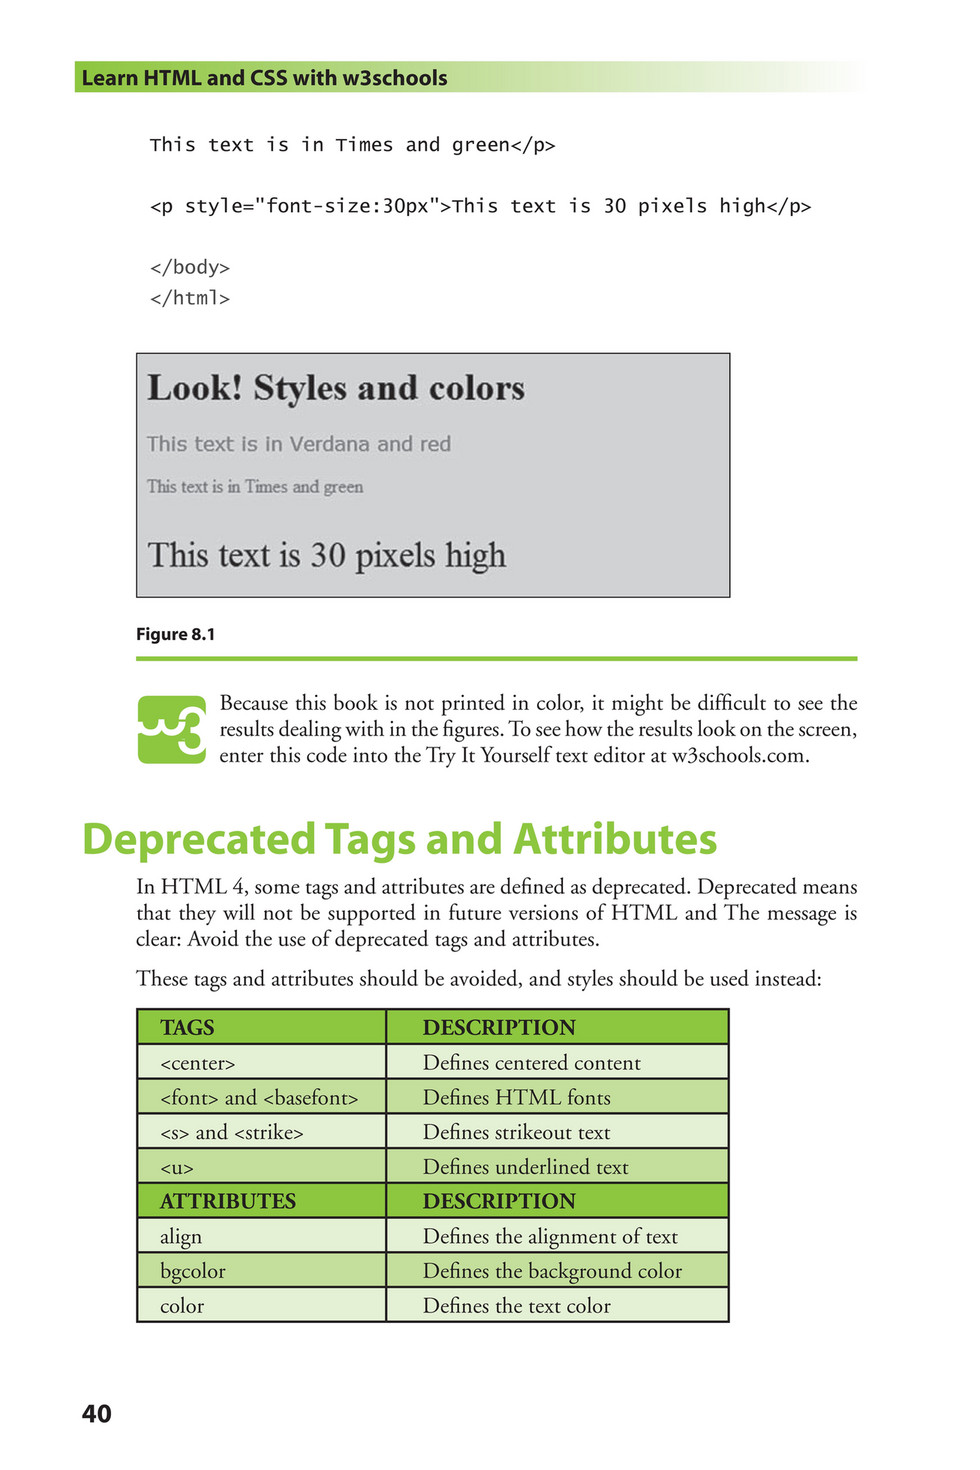 Citrus Fashions - [Wiley] - Learn HTML and CSS - [w3Schools] - Page 52-53 -  Created with 